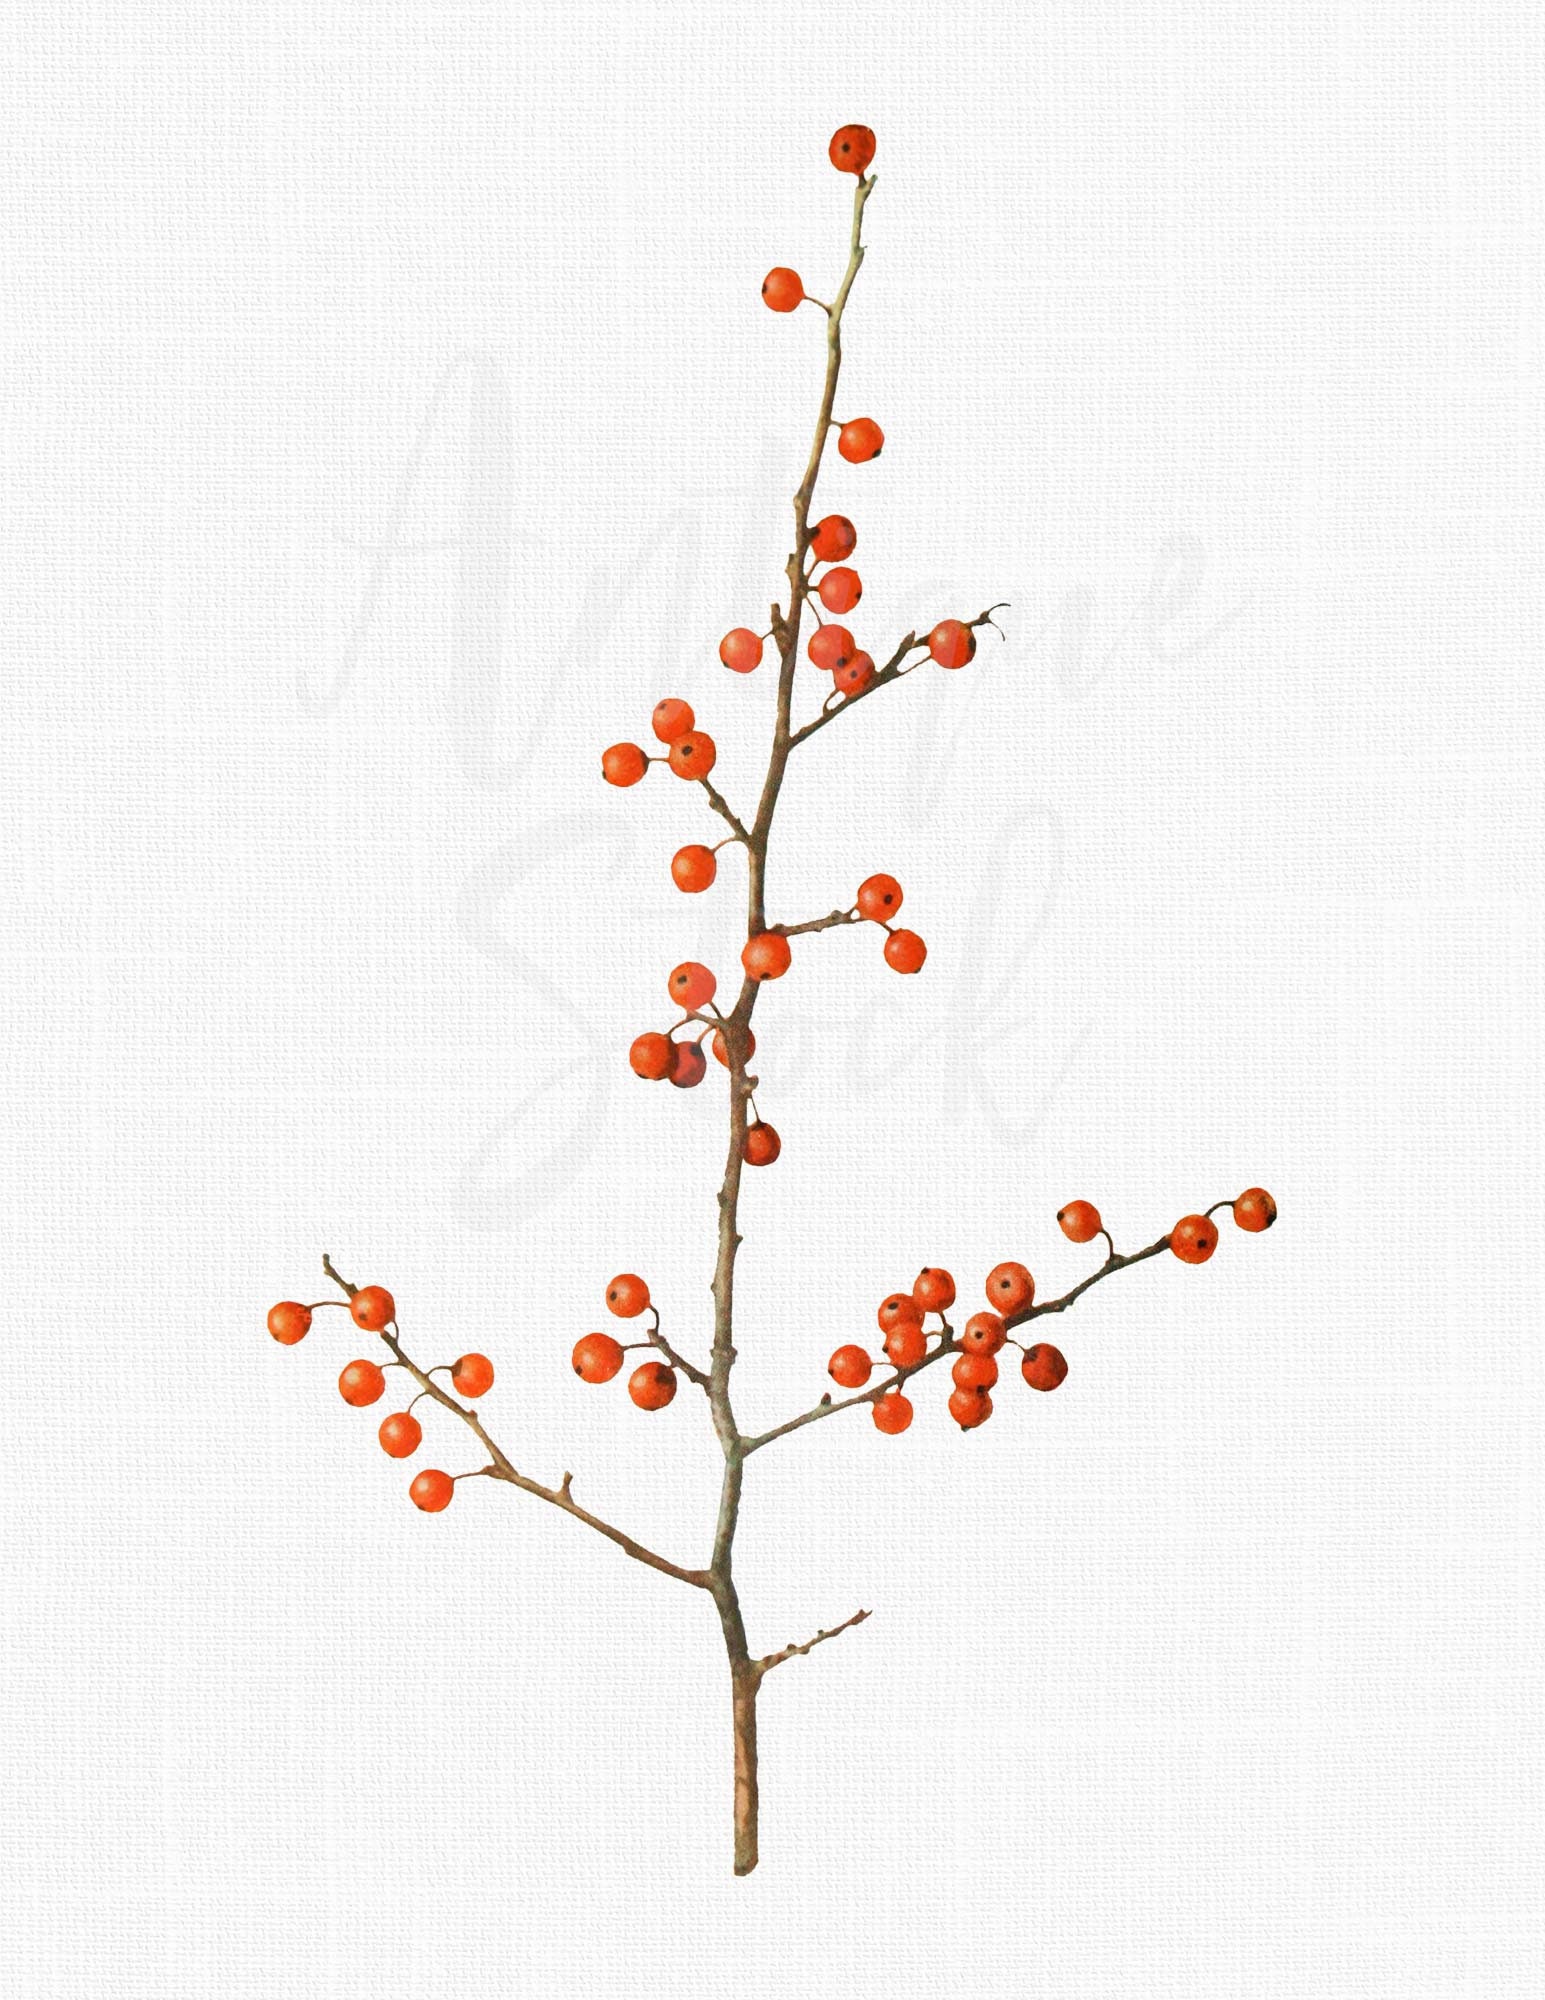 Pine Branch Clipart virginia Pine Botanical Illustration Digital Download  for Crafts, Wall Art, Collages, Transfers, Scrapbooking 